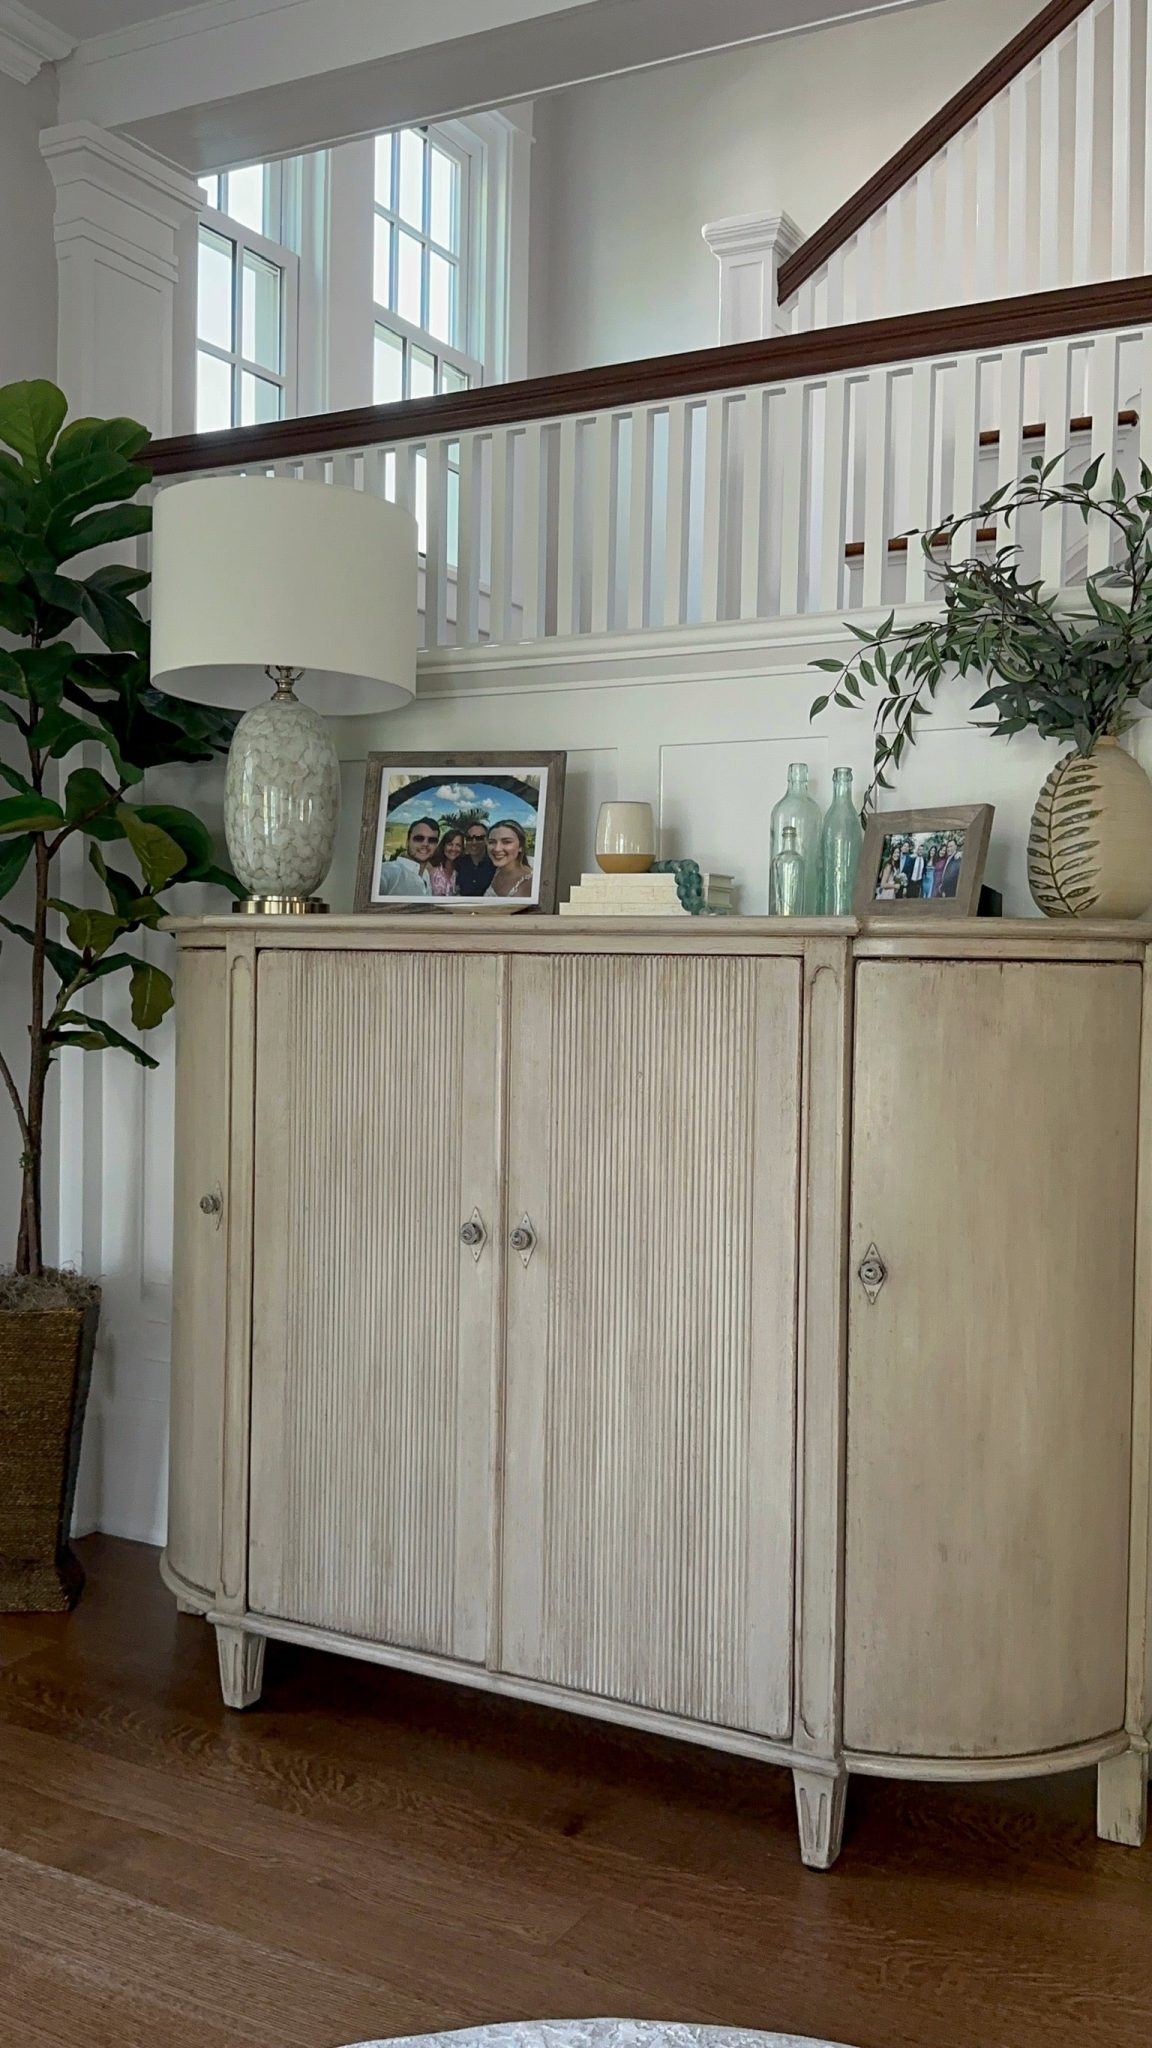 A white sideboard in a living room adds a touch of interior design elegance to the space.